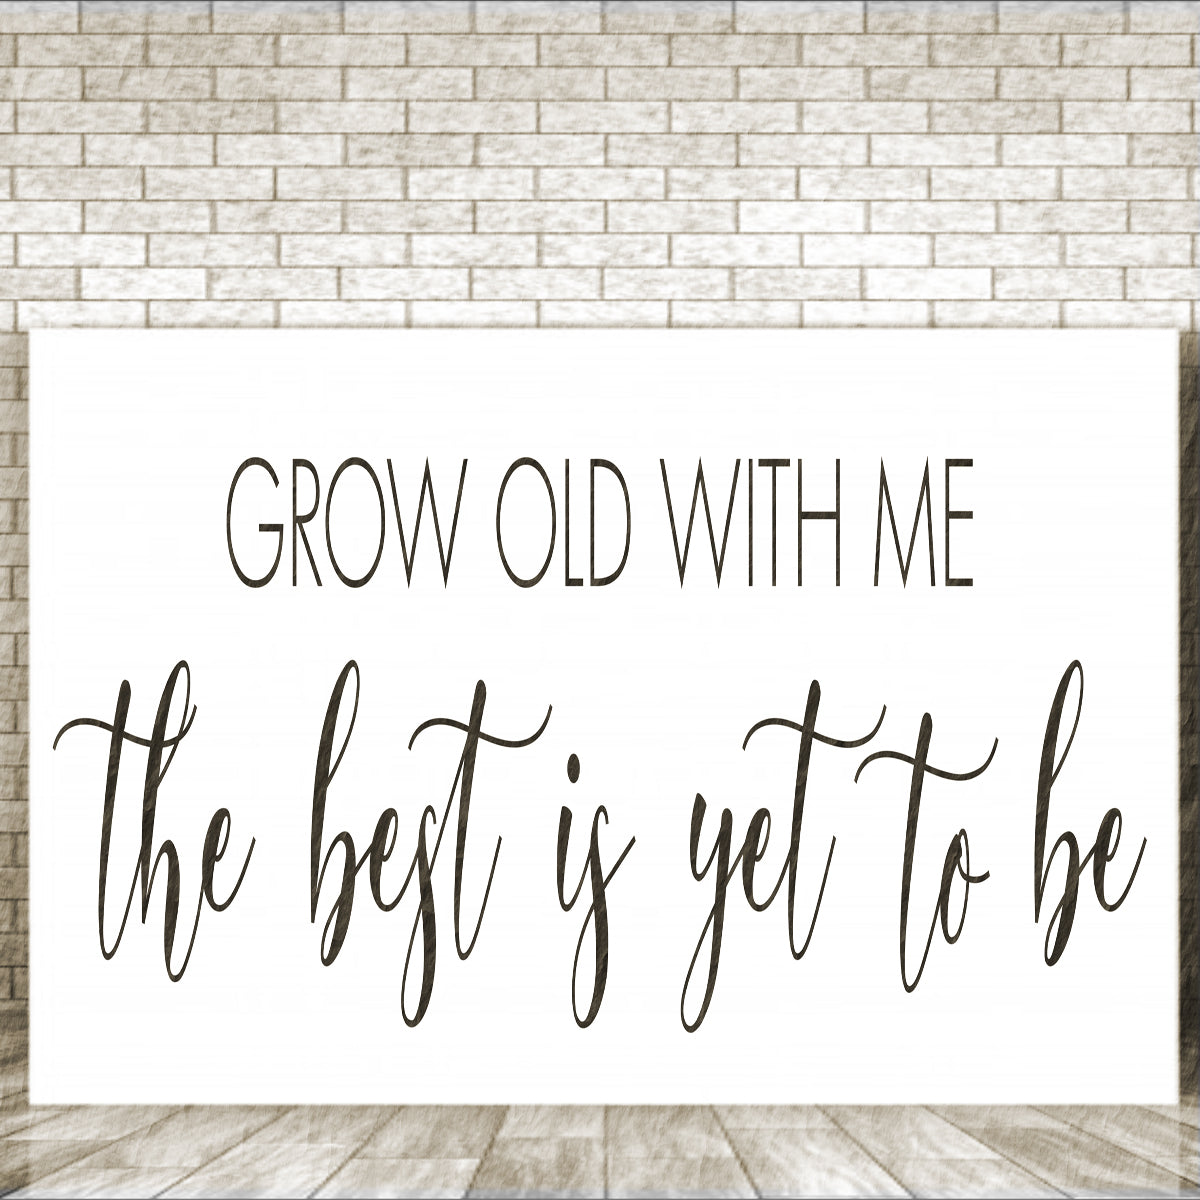 Grow Old With Me Stencil - Superior Stencils